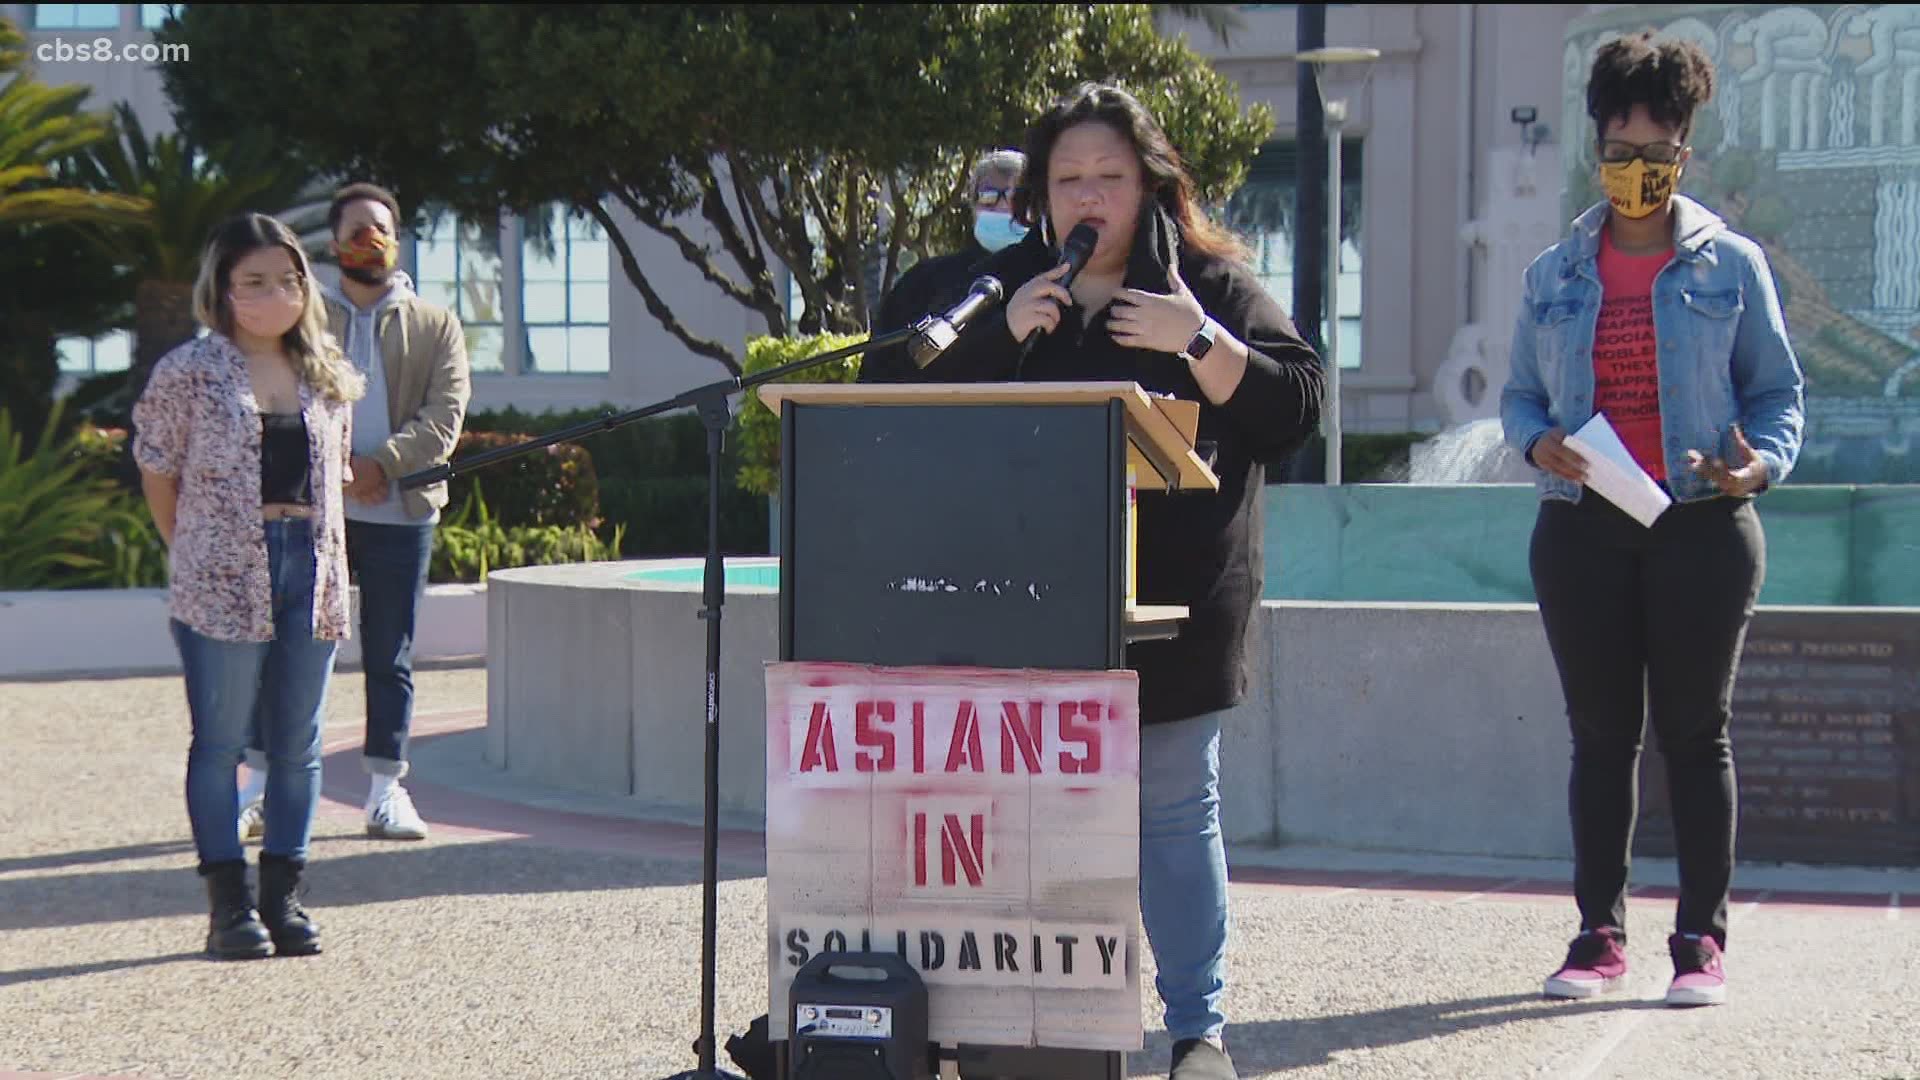 In response to the deadly Georgia shooting, local community activists held a rally downtown to combat anti-Asian violence.